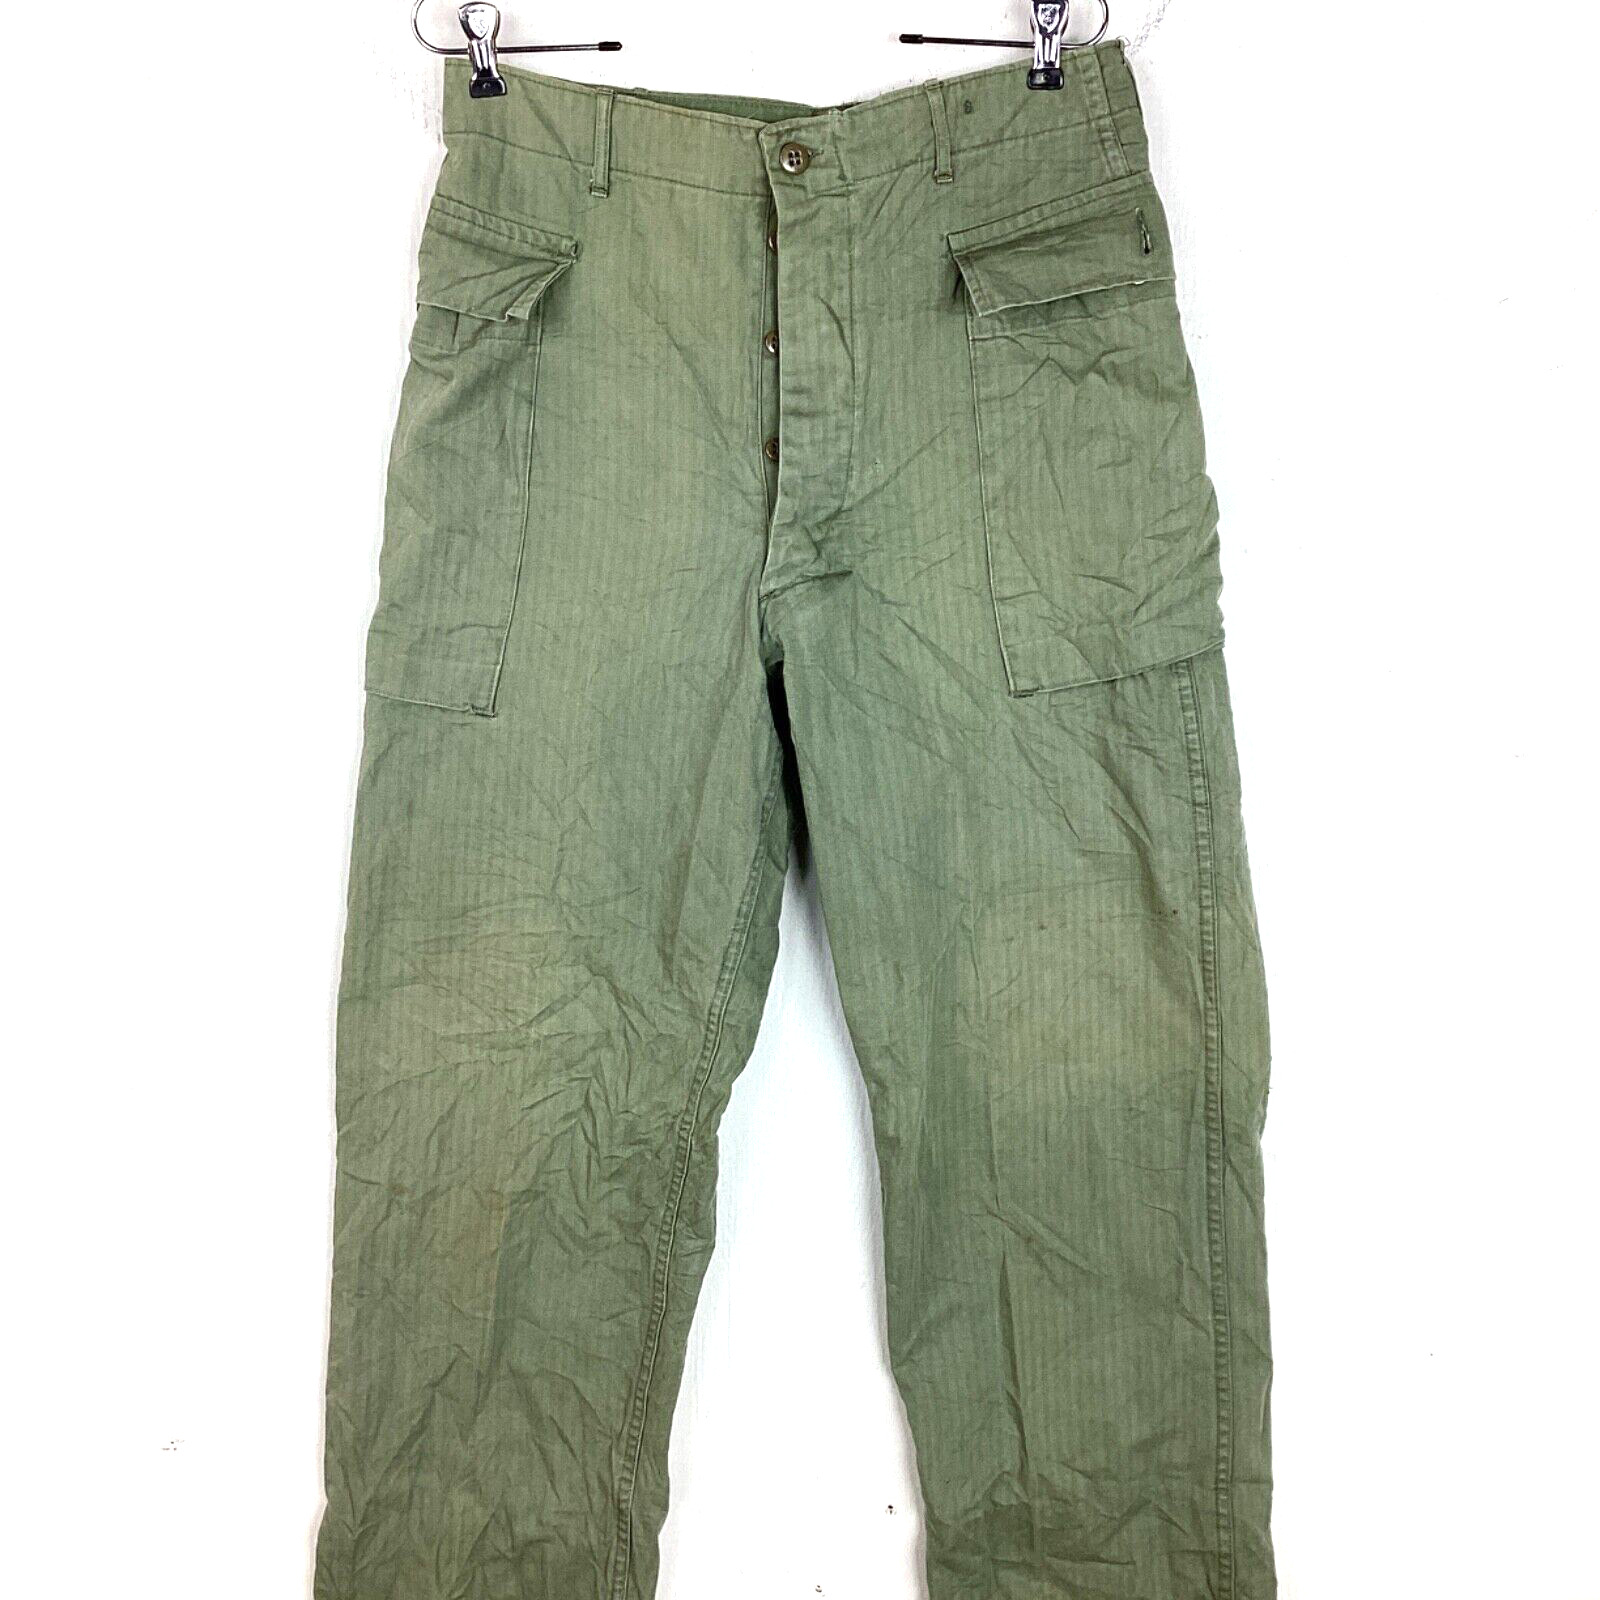 Vintage Us Military Hbt Trousers Size 34x31 Green 40s 50s